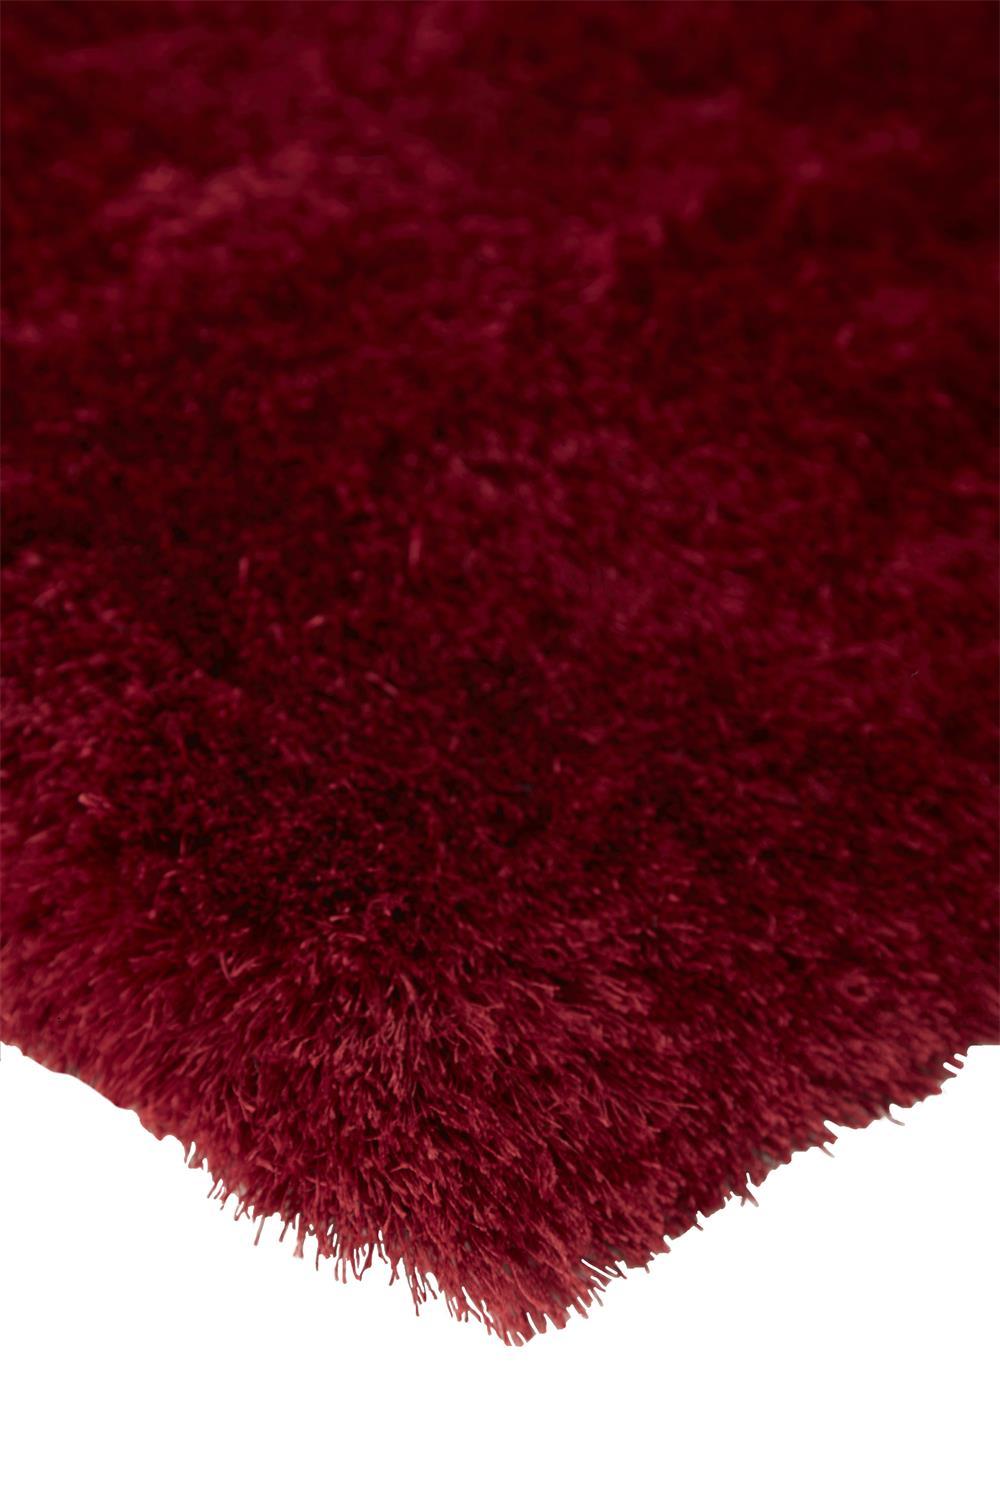 Feizy Feizy Indochine Plush Shag Rug - Available in 7 Sizes - Metallic Sheen Cranberry Red